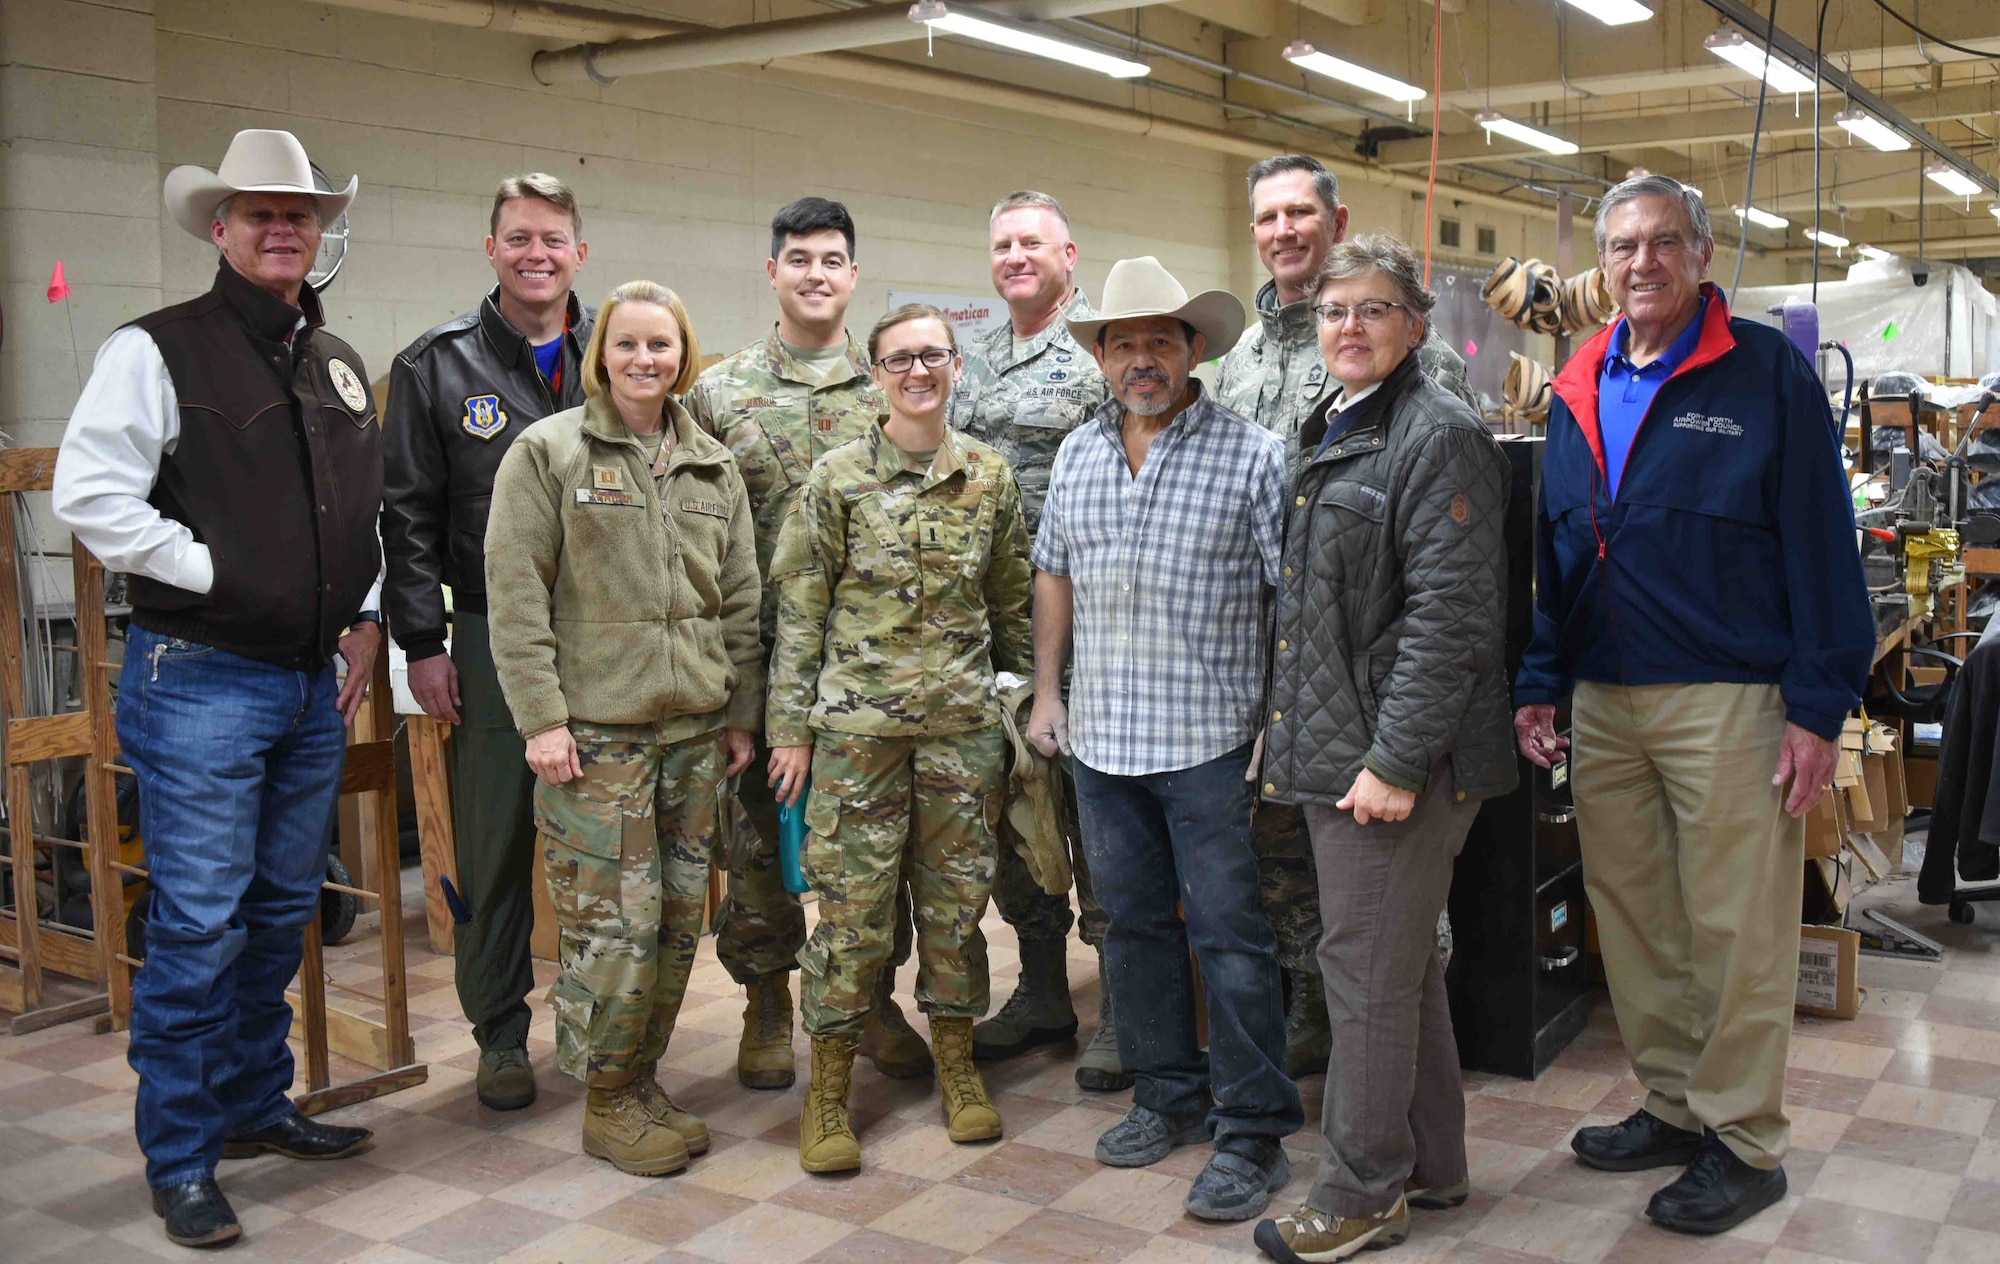 301st Fighter Wing Aircraft Maintenance Squadron Honorary Commander Mr. Keith Mundee (left), who is also the president of American Hat Co., poses alongside 301 FW Commander Col. Mitch Hanson and several other members of the wing's leadership before a factory tour of American Hat Company in Bowie, Texas on November 15, 2019. The 301st Fighter Wing Honorary Commanders Program has invited civic leaders to many behind-the-scenes military tours but this was the first time we were hosted by one of our honorary commanders. (U.S. Air Force photo by Capt. Jessica Gross)